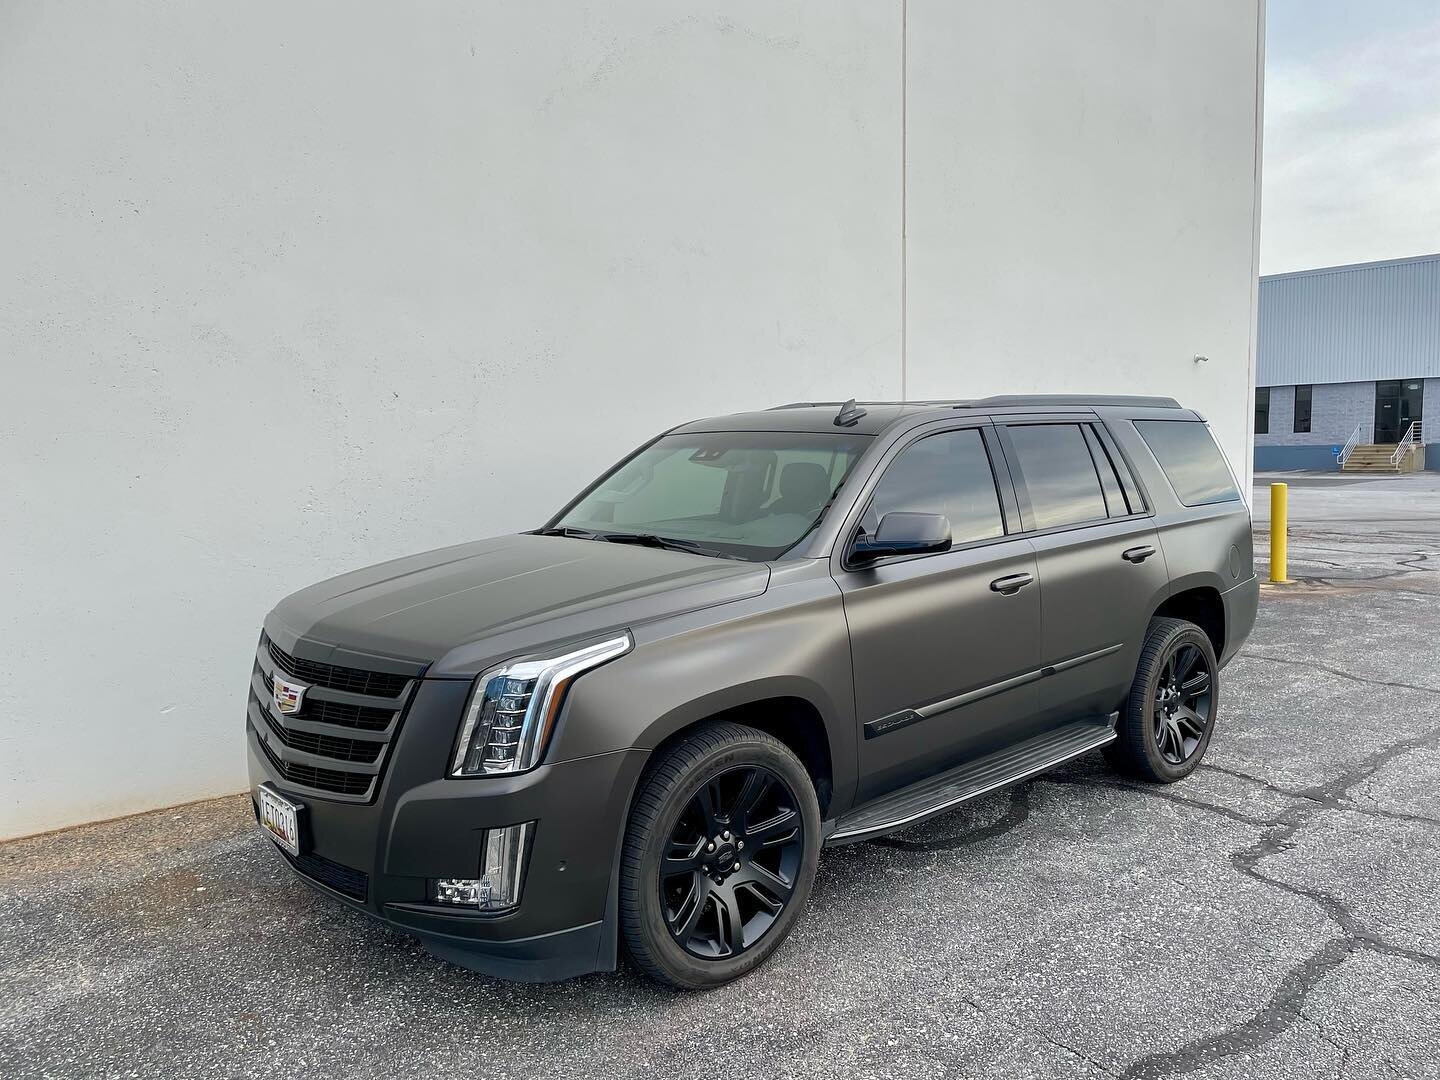 Escalade wrapped with @adgraphics_na Satin Basalt  and Satin Black chrome delete and Satin Black wheels with the help from our friends at @alloywheelrepair_ #radwraps